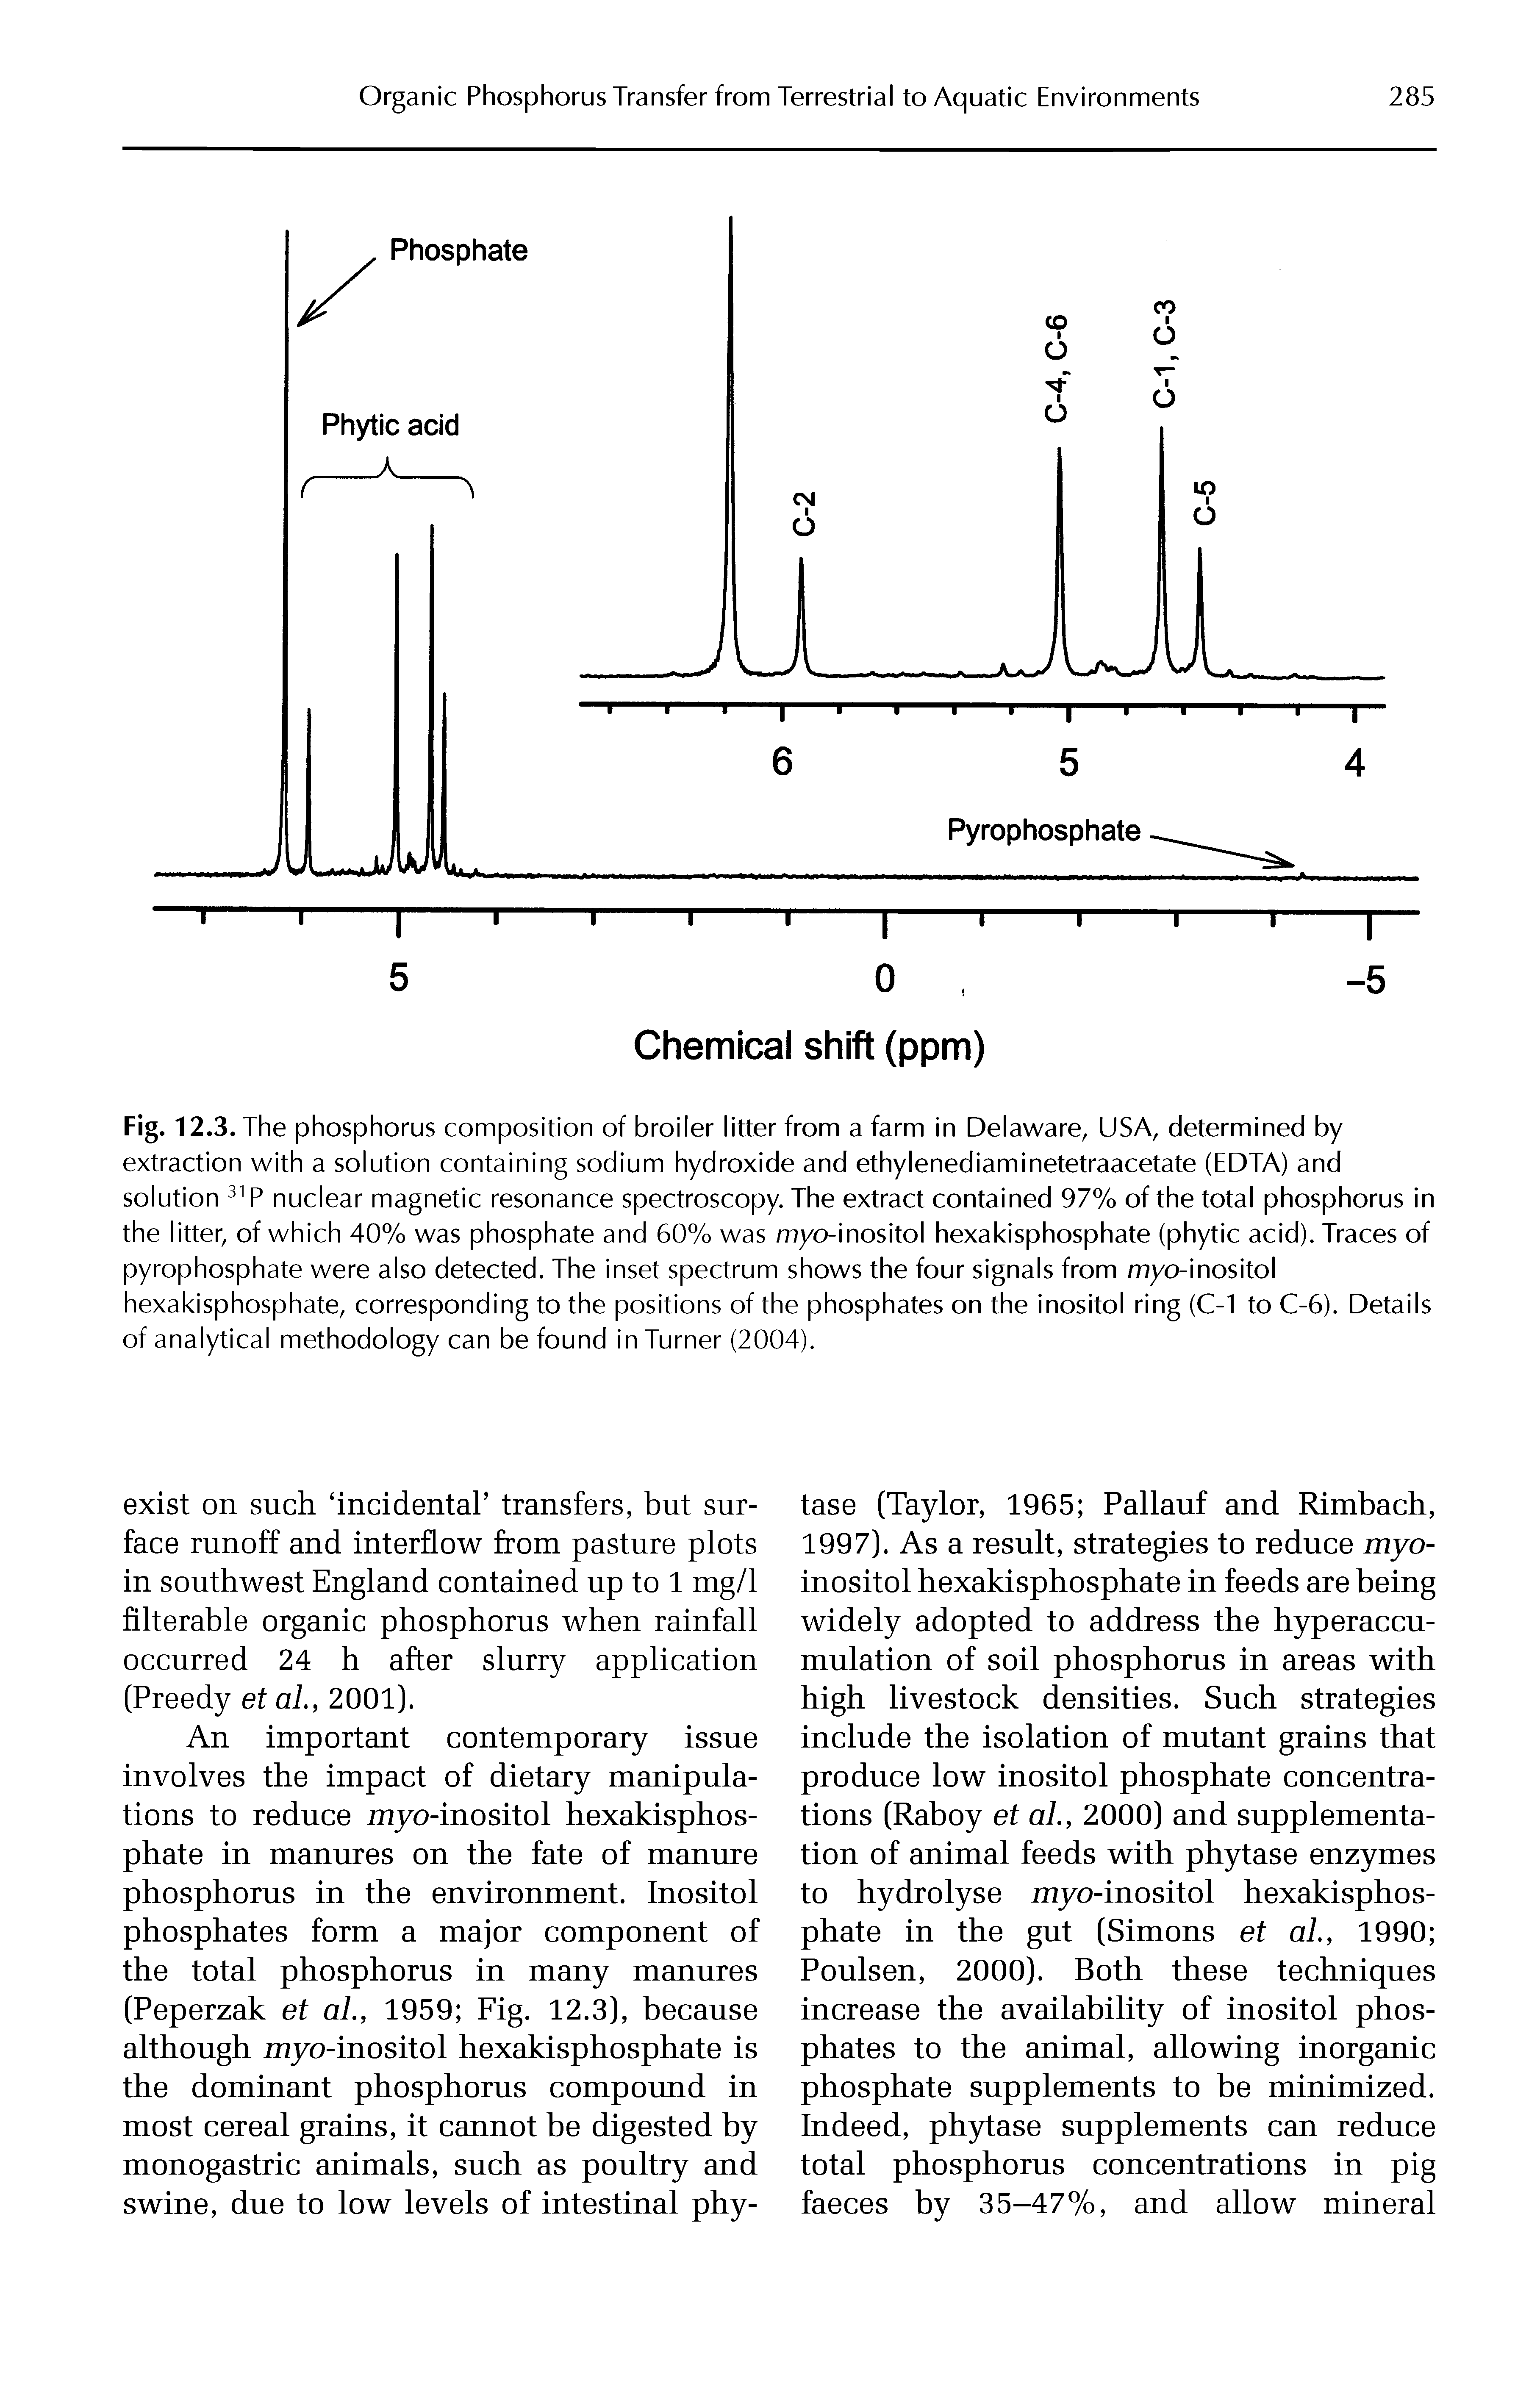 Fig. 12.3. The phosphorus composition of broiler litter from a farm in Delaware, USA, determined by extraction with a solution containing sodium hydroxide and ethylenediaminetetraacetate (EDTA) and solution nuclear magnetic resonance spectroscopy. The extract contained 97% of the total phosphorus in the litter, of which 40% was phosphate and 60% was myo-inositol hexakisphosphate (phytic acid). Traces of pyrophosphate were also detected. The inset spectrum shows the four signals from myo-inositol hexakisphosphate, corresponding to the positions of the phosphates on the inositol ring (C-1 to C-6). Details of analytical methodology can be found in Turner (2004).